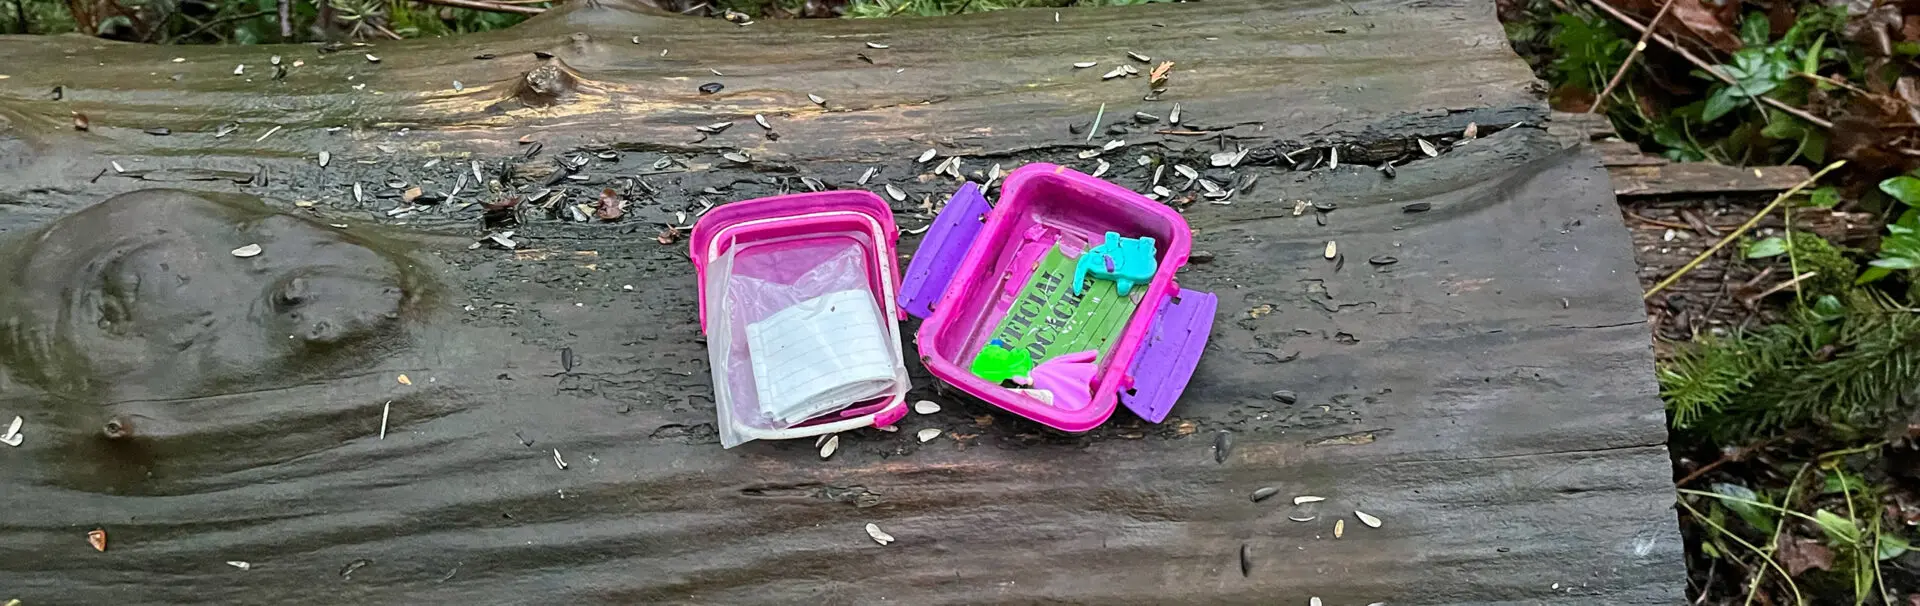 Geocaching is a Fun Outdoor Family Activity